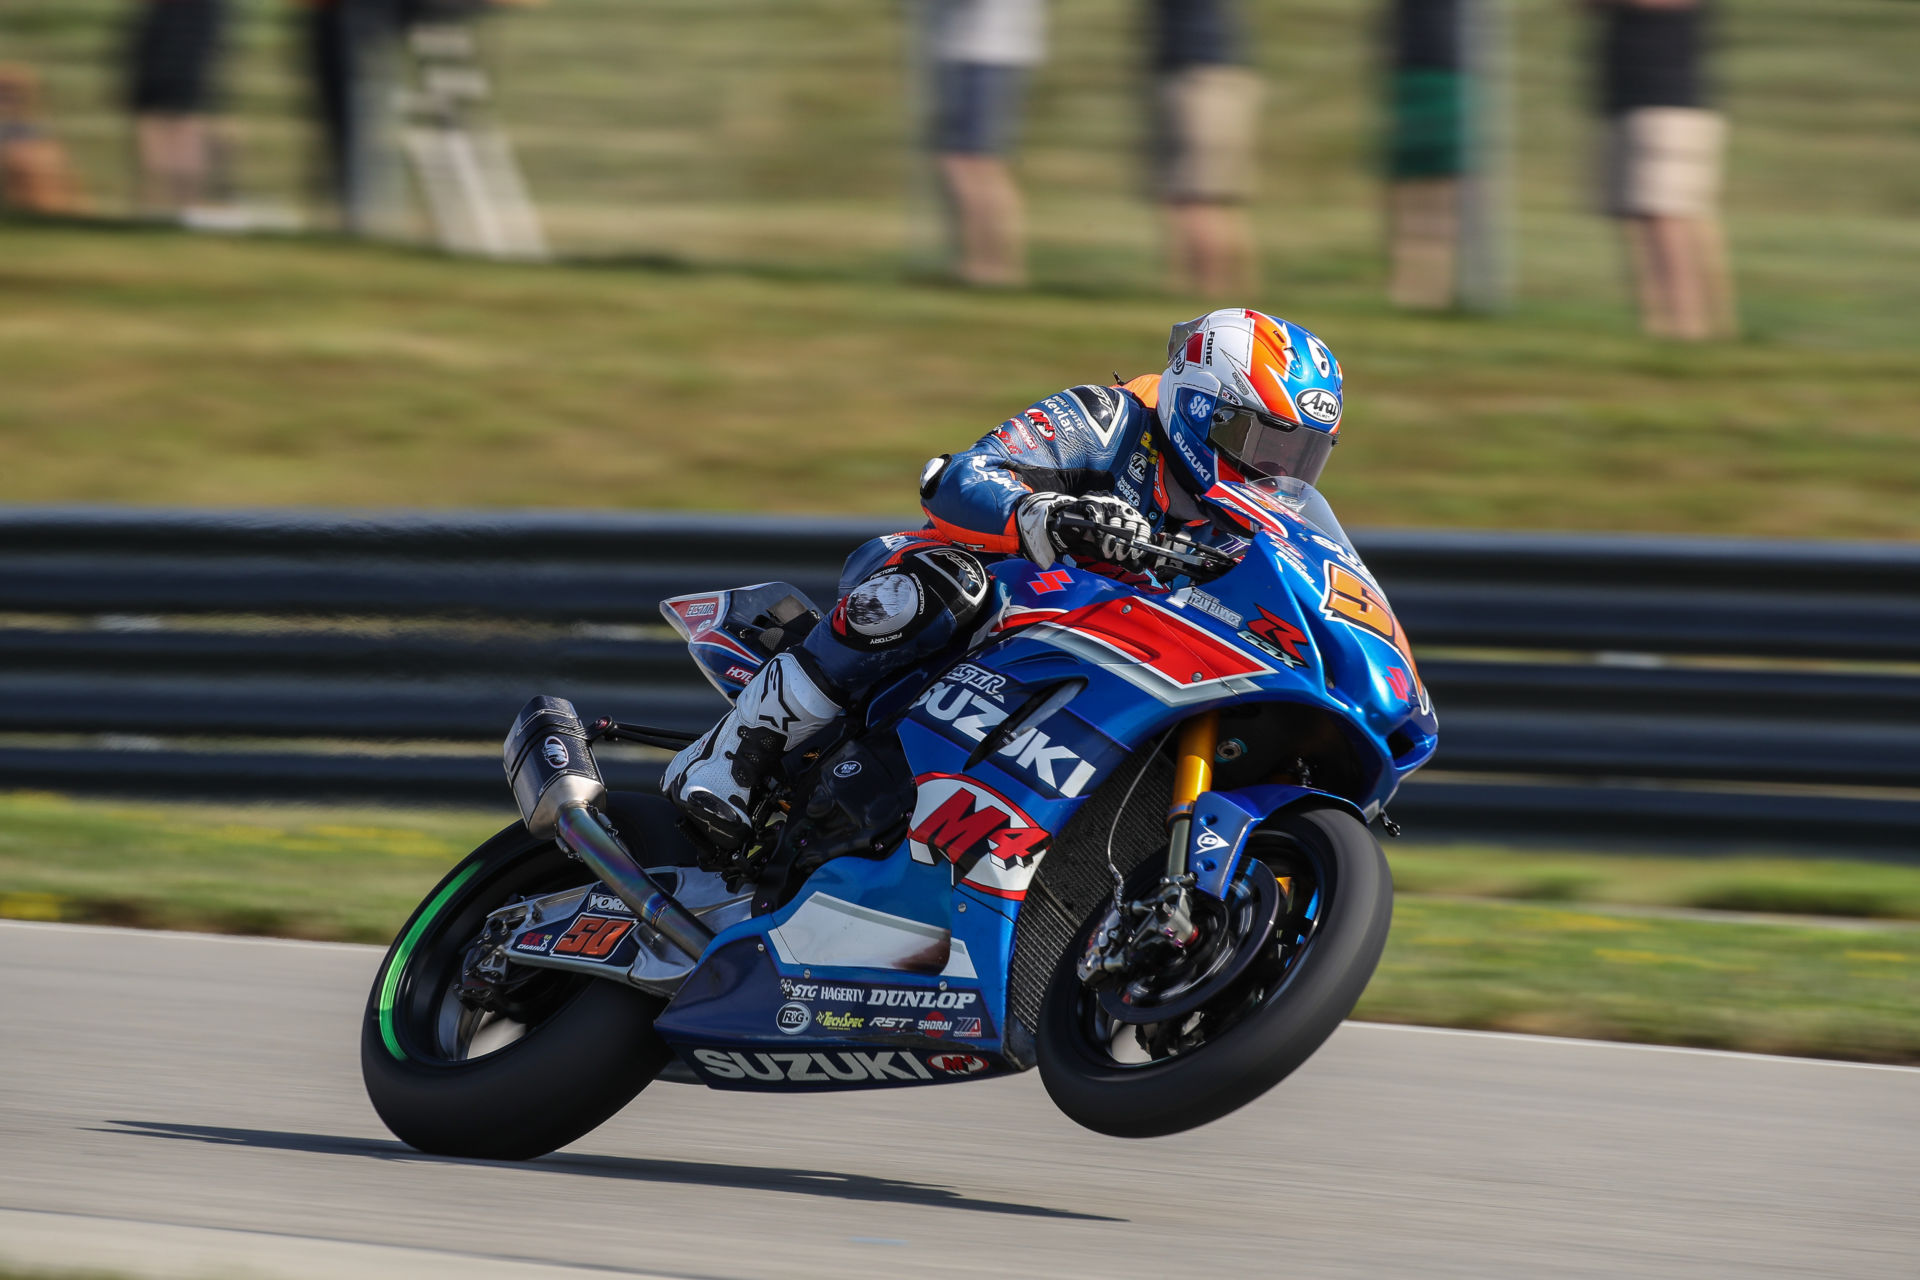 Bobby Fong (50) delivered a well-earned podium finish on his Suzuki GSX-R1000R on Sunday. Photo by Brian J. Nelson, courtesy Suzuki Motor USA, LLC.